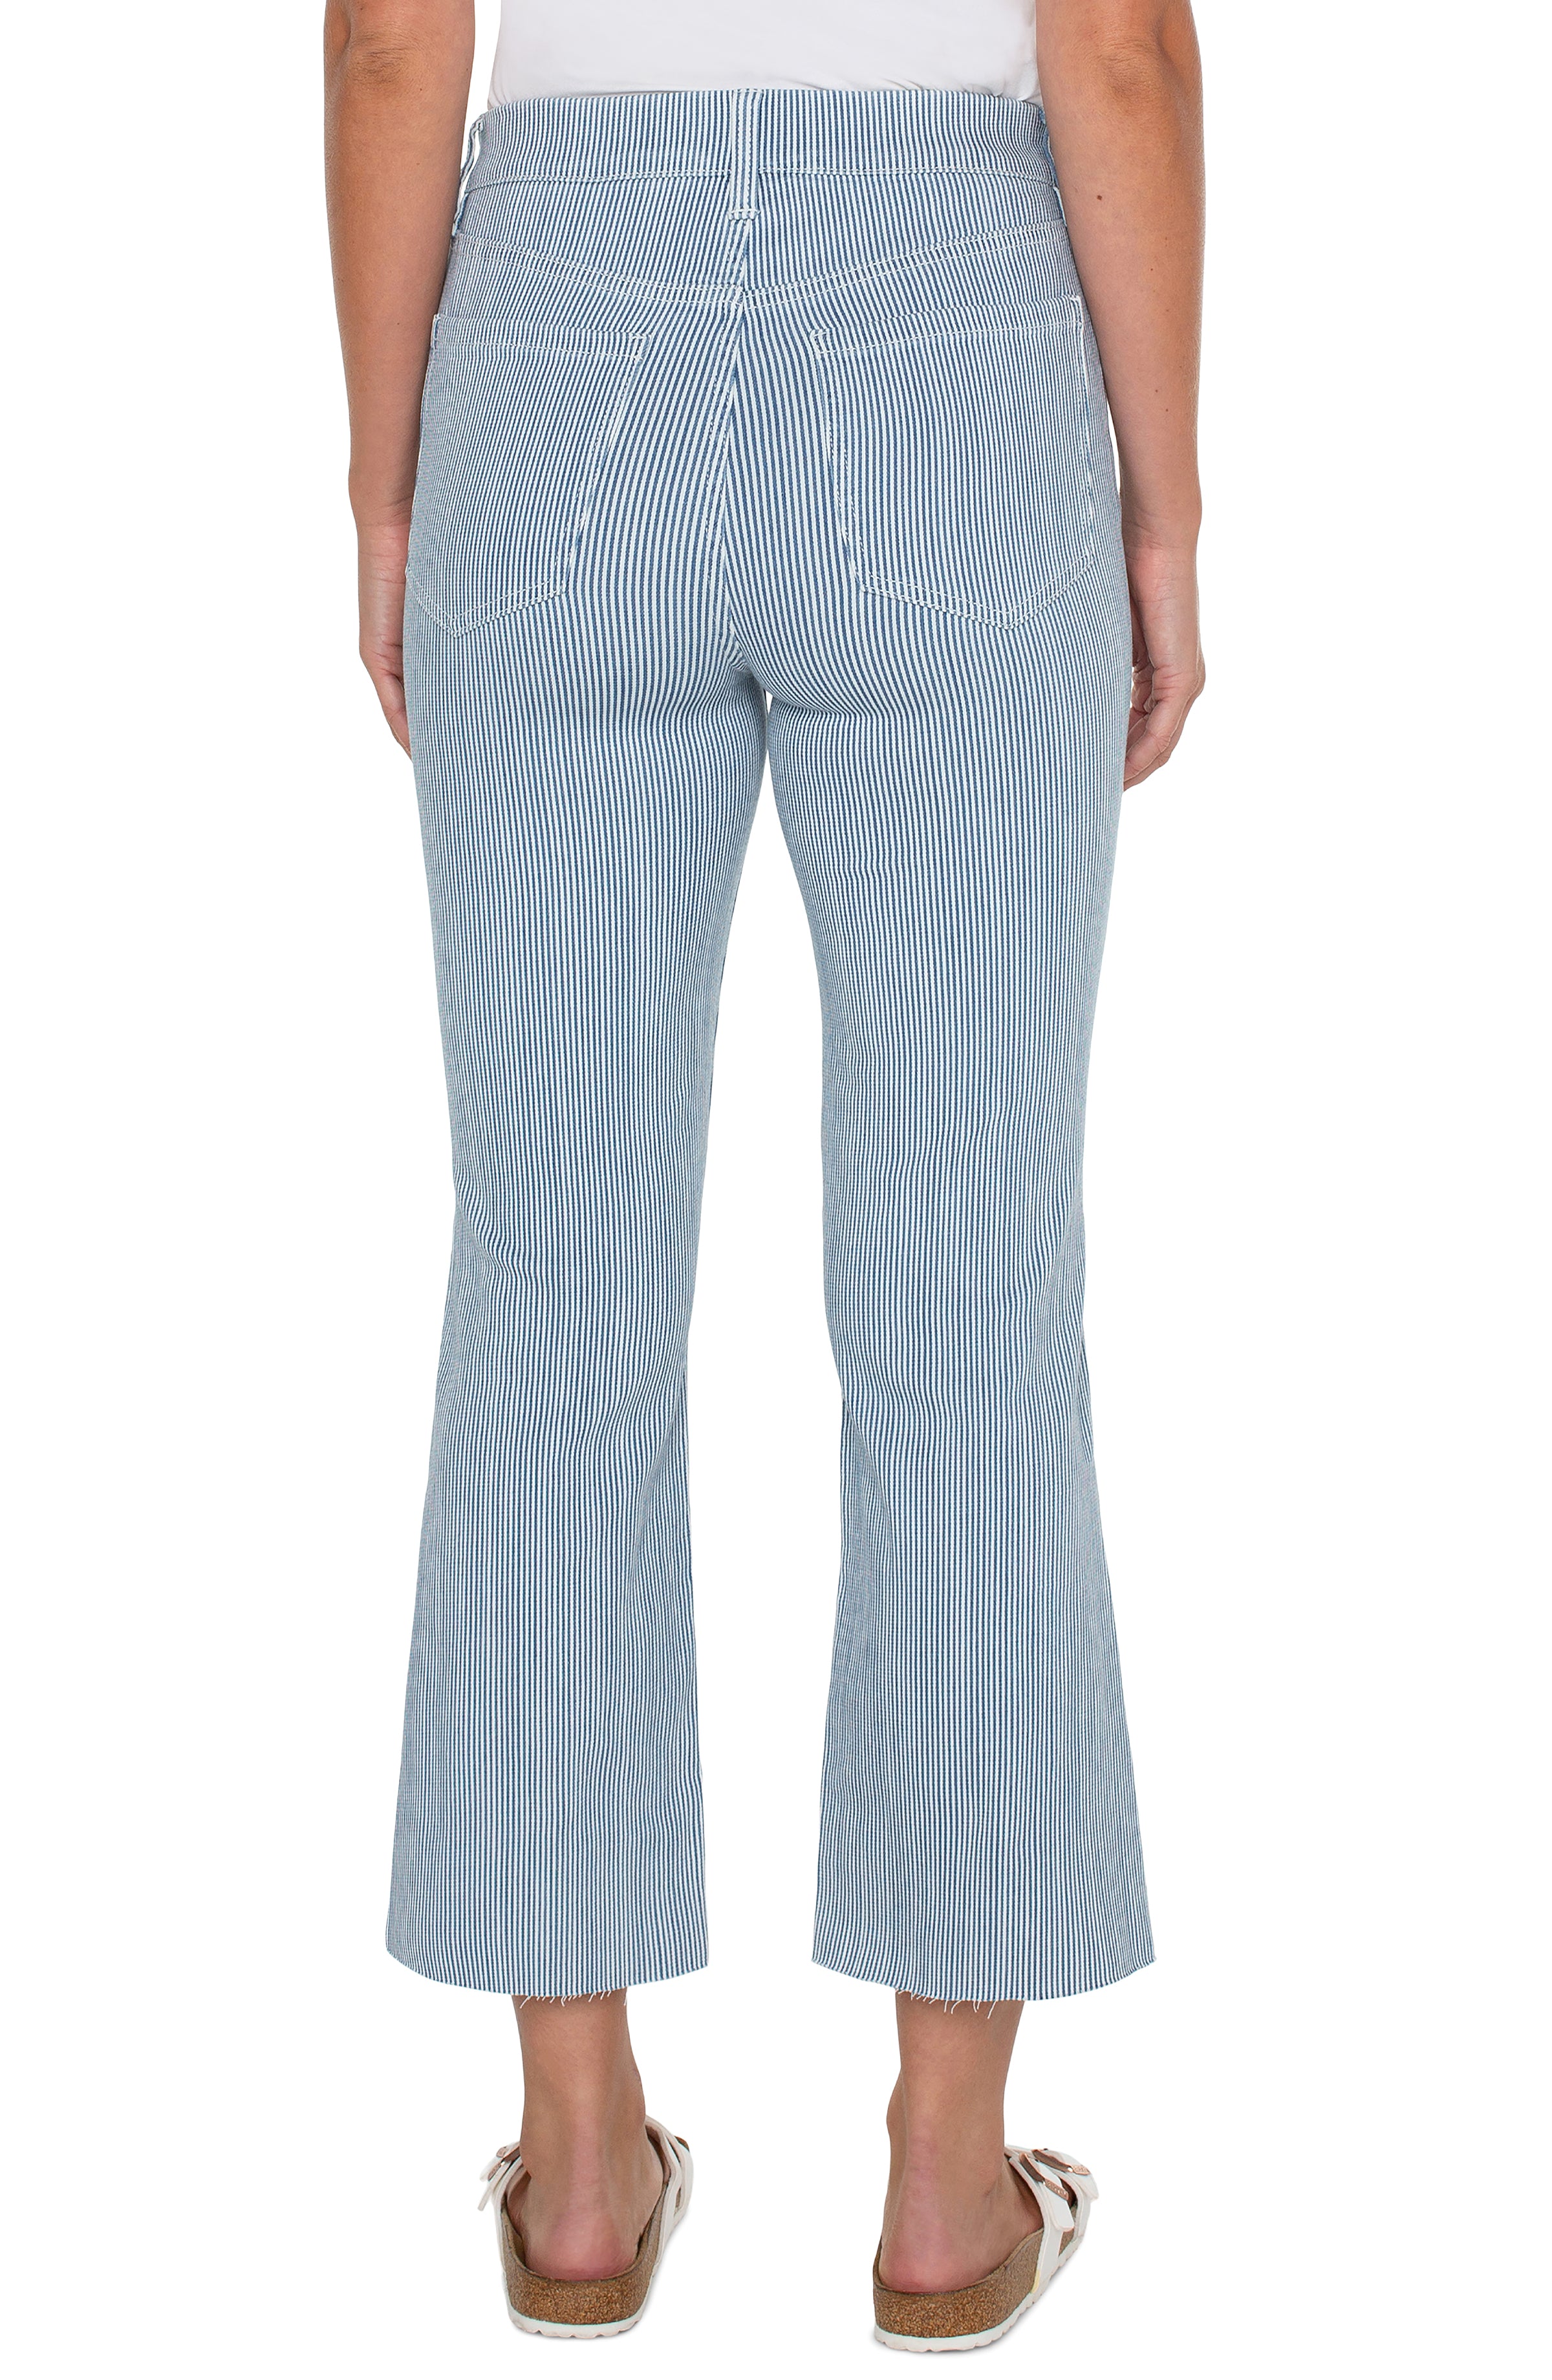 Liverpool Gia Glider Crop Flare Twisted Seam - Chambray Stripe Back View